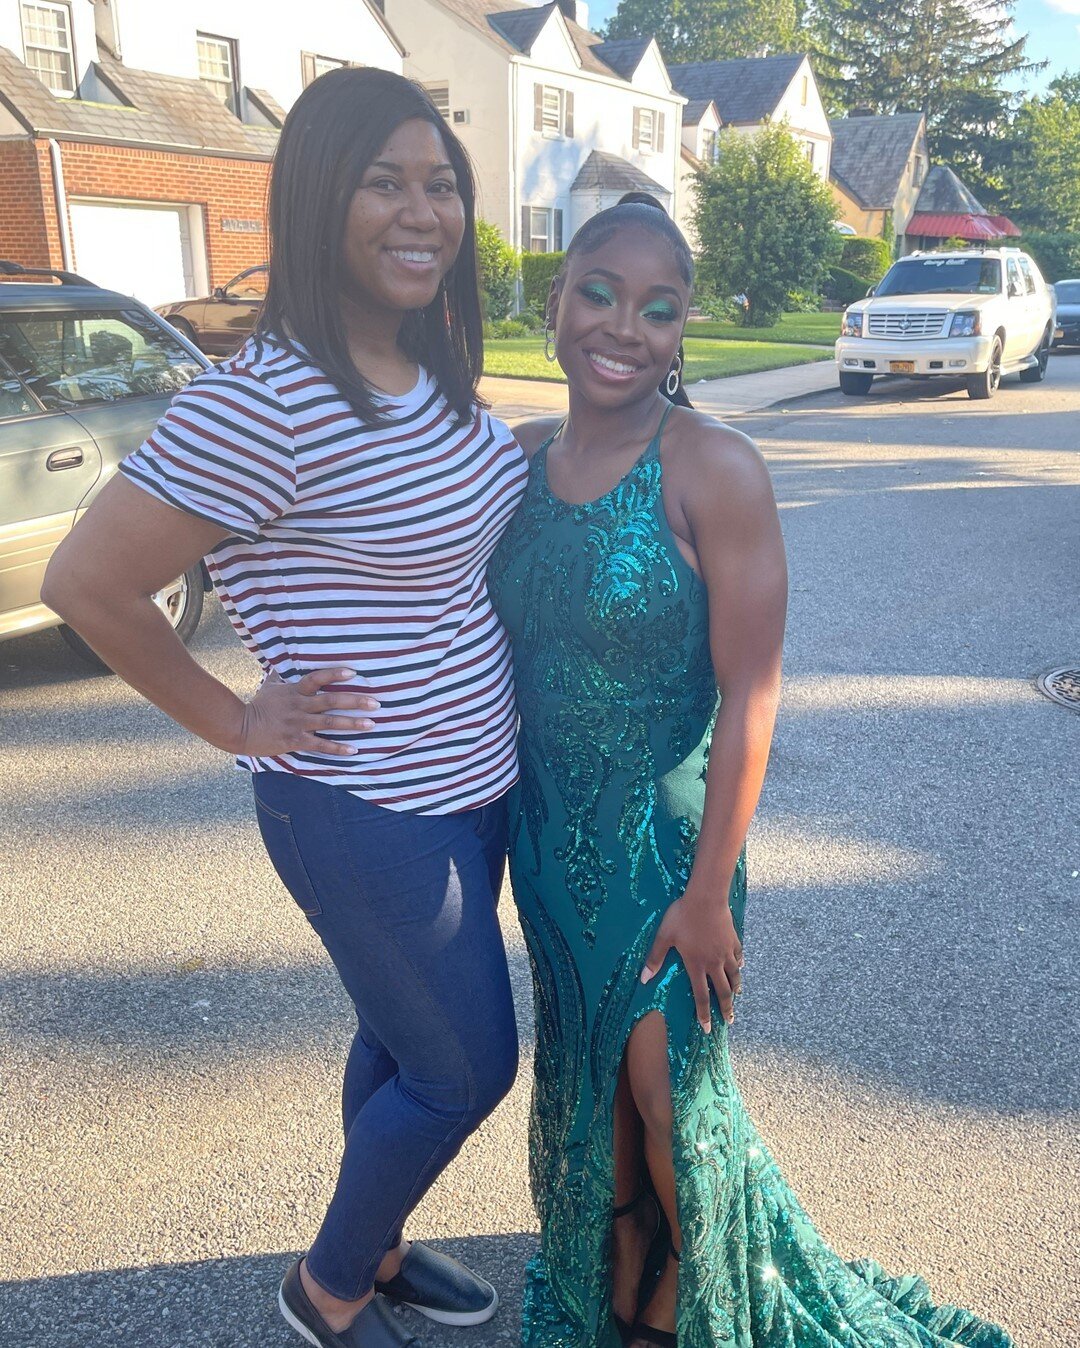 Over the last few days, I remembered how important social support and mentorship are to teenagers. I was excited to help prepare and send off my mentee, @spiritdakota, to her senior prom. I&rsquo;m grateful to her parents, who let go and asked for he